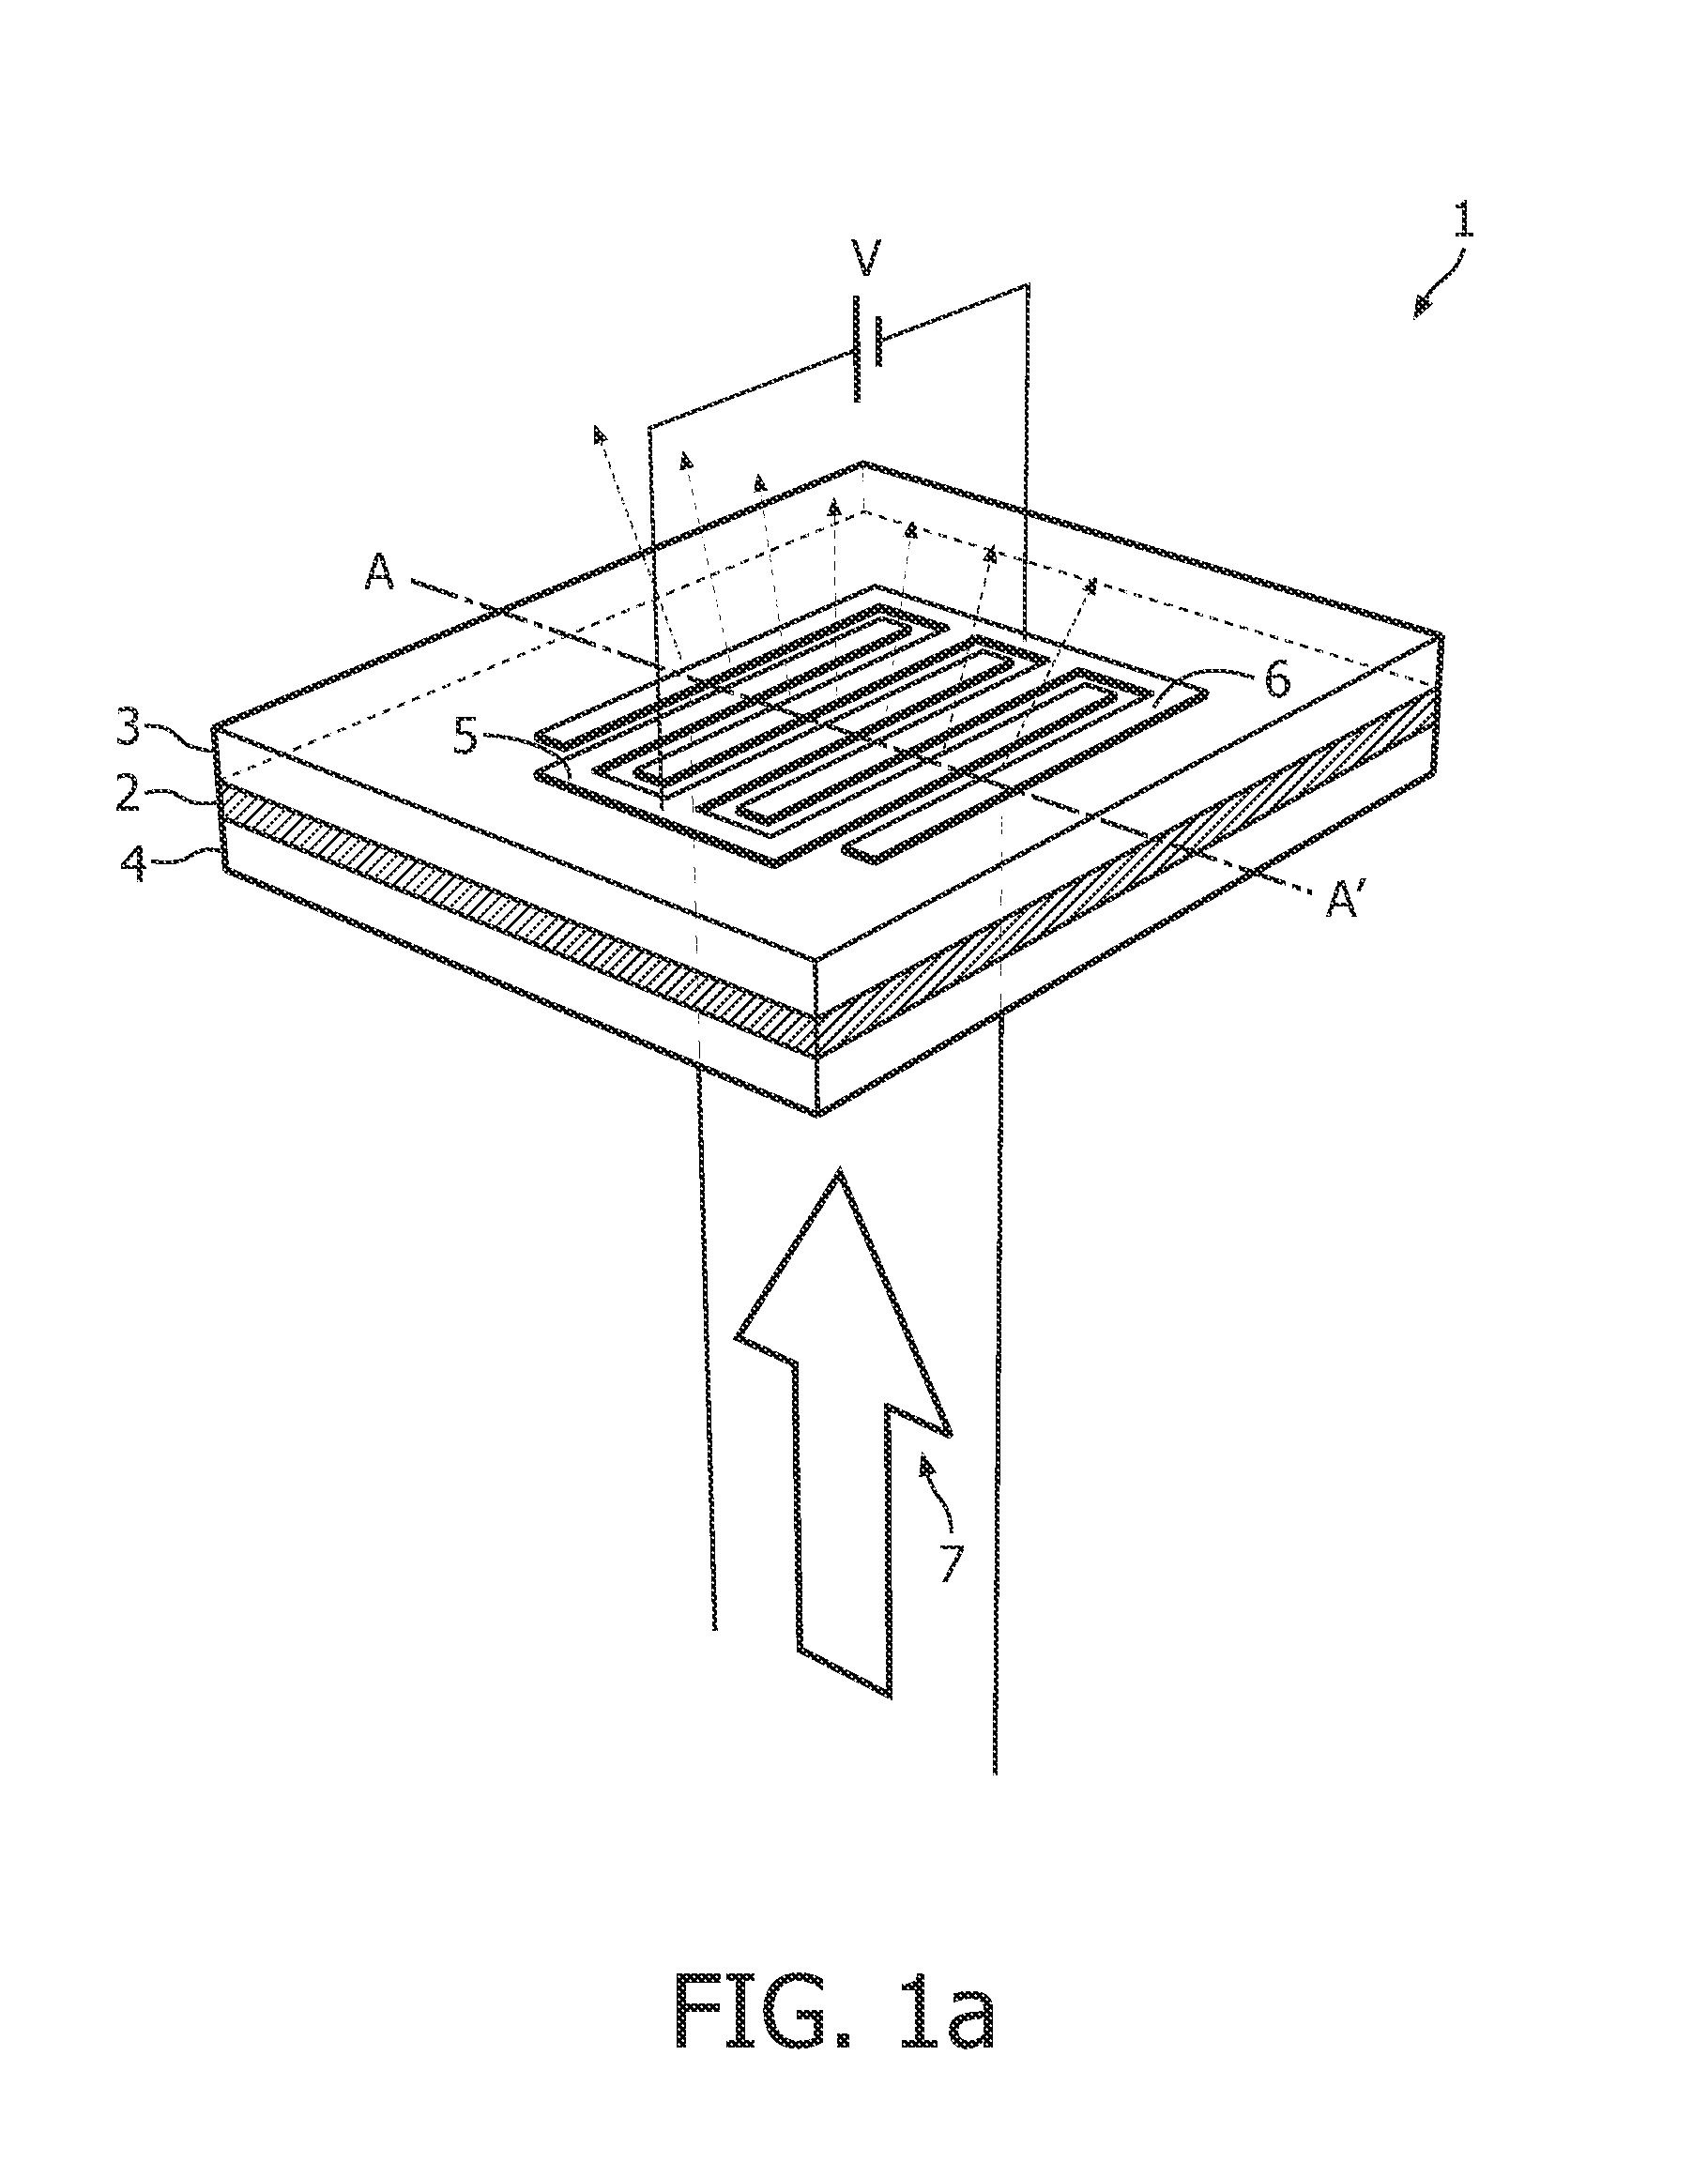 Beam-shaping device